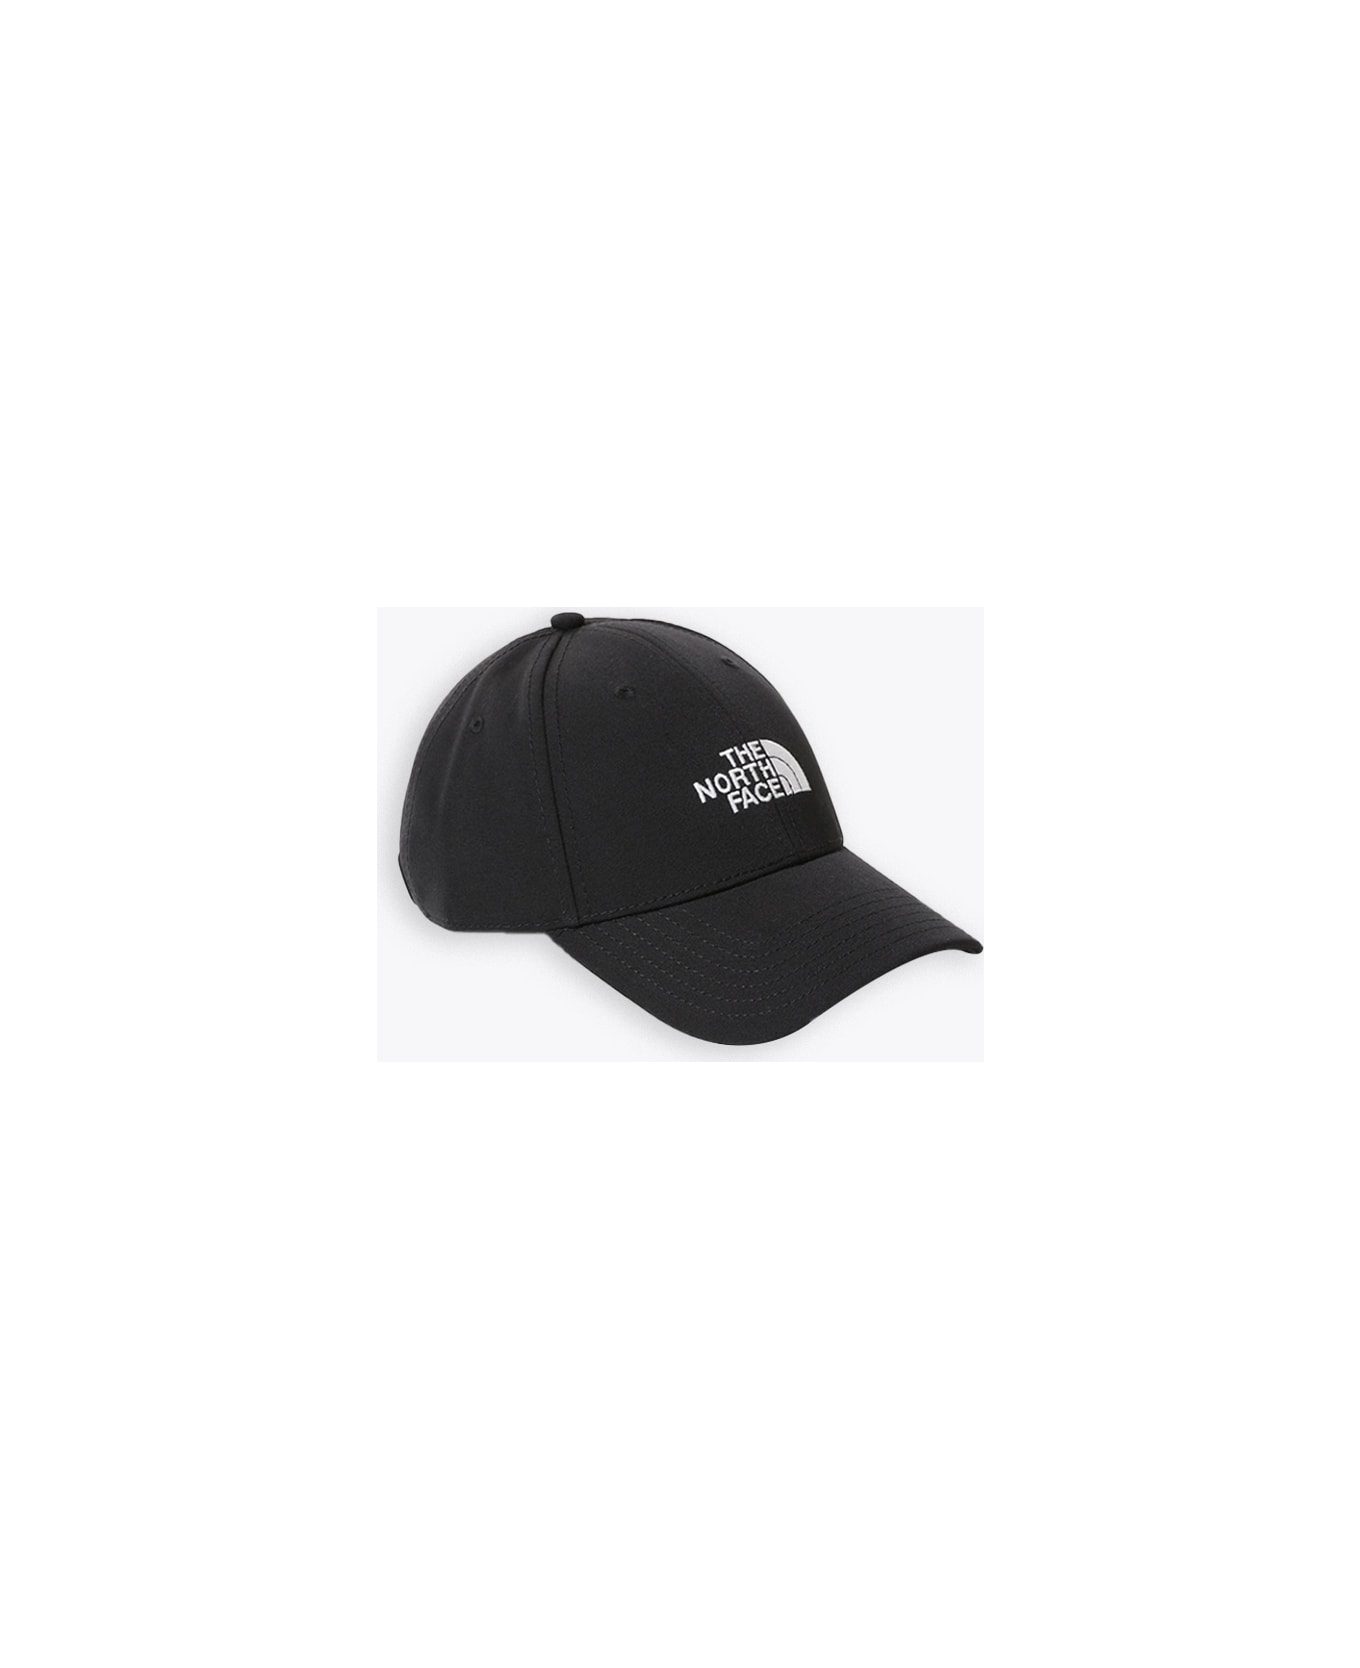 The North Face Recycled 66 Classic Hat Black cap with logo embroidery - Recycled 66 classic hat - Nero/bianco